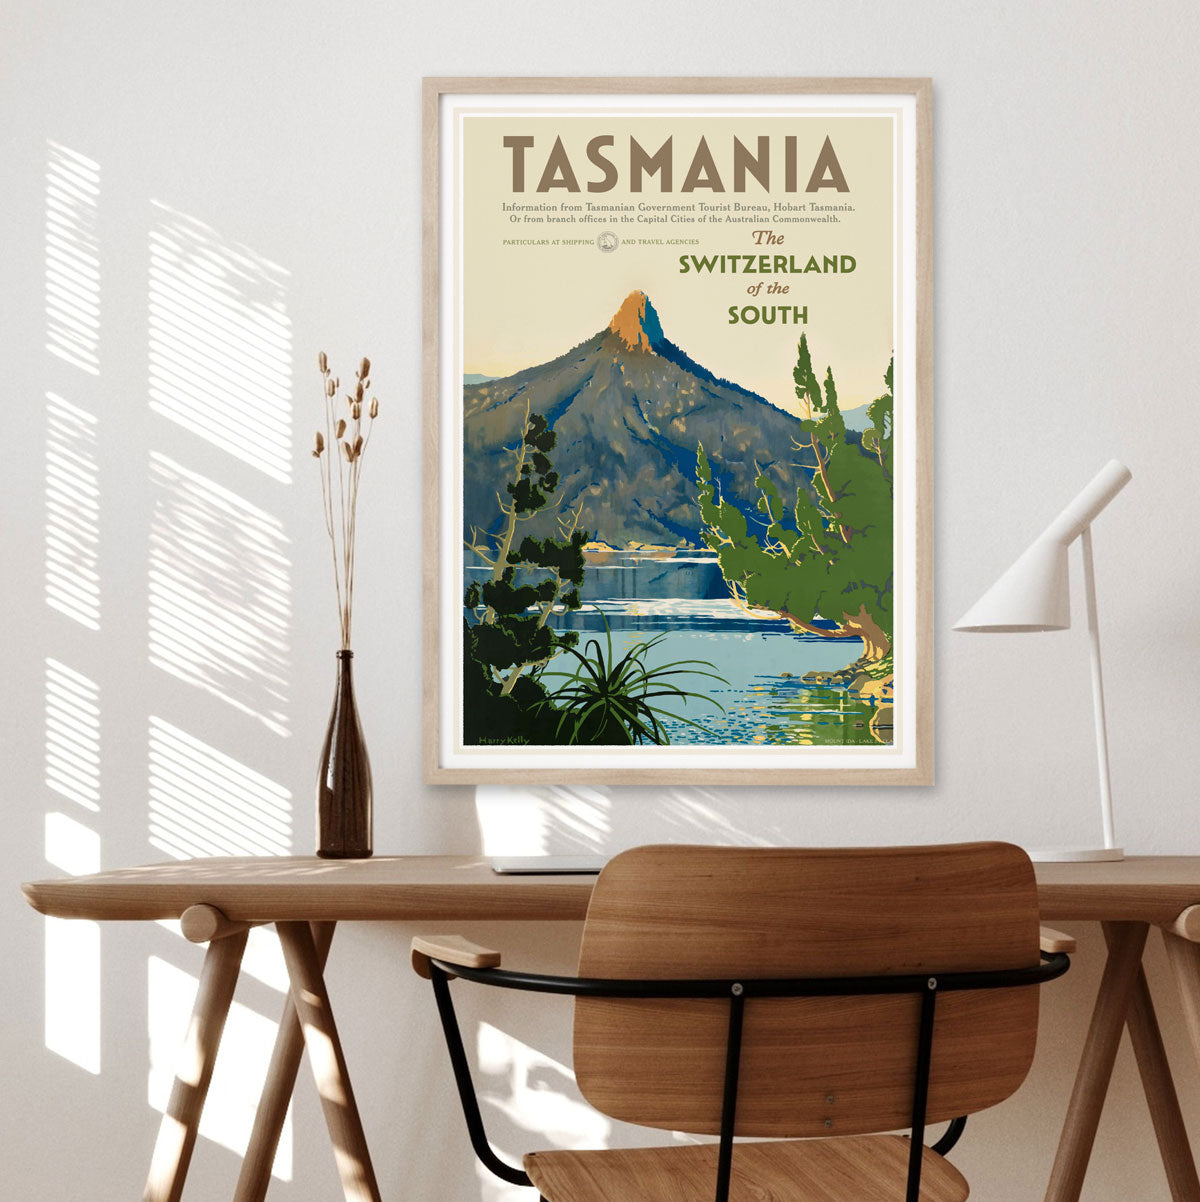 Tasmania vintage retro advertising poster from Places We Luv